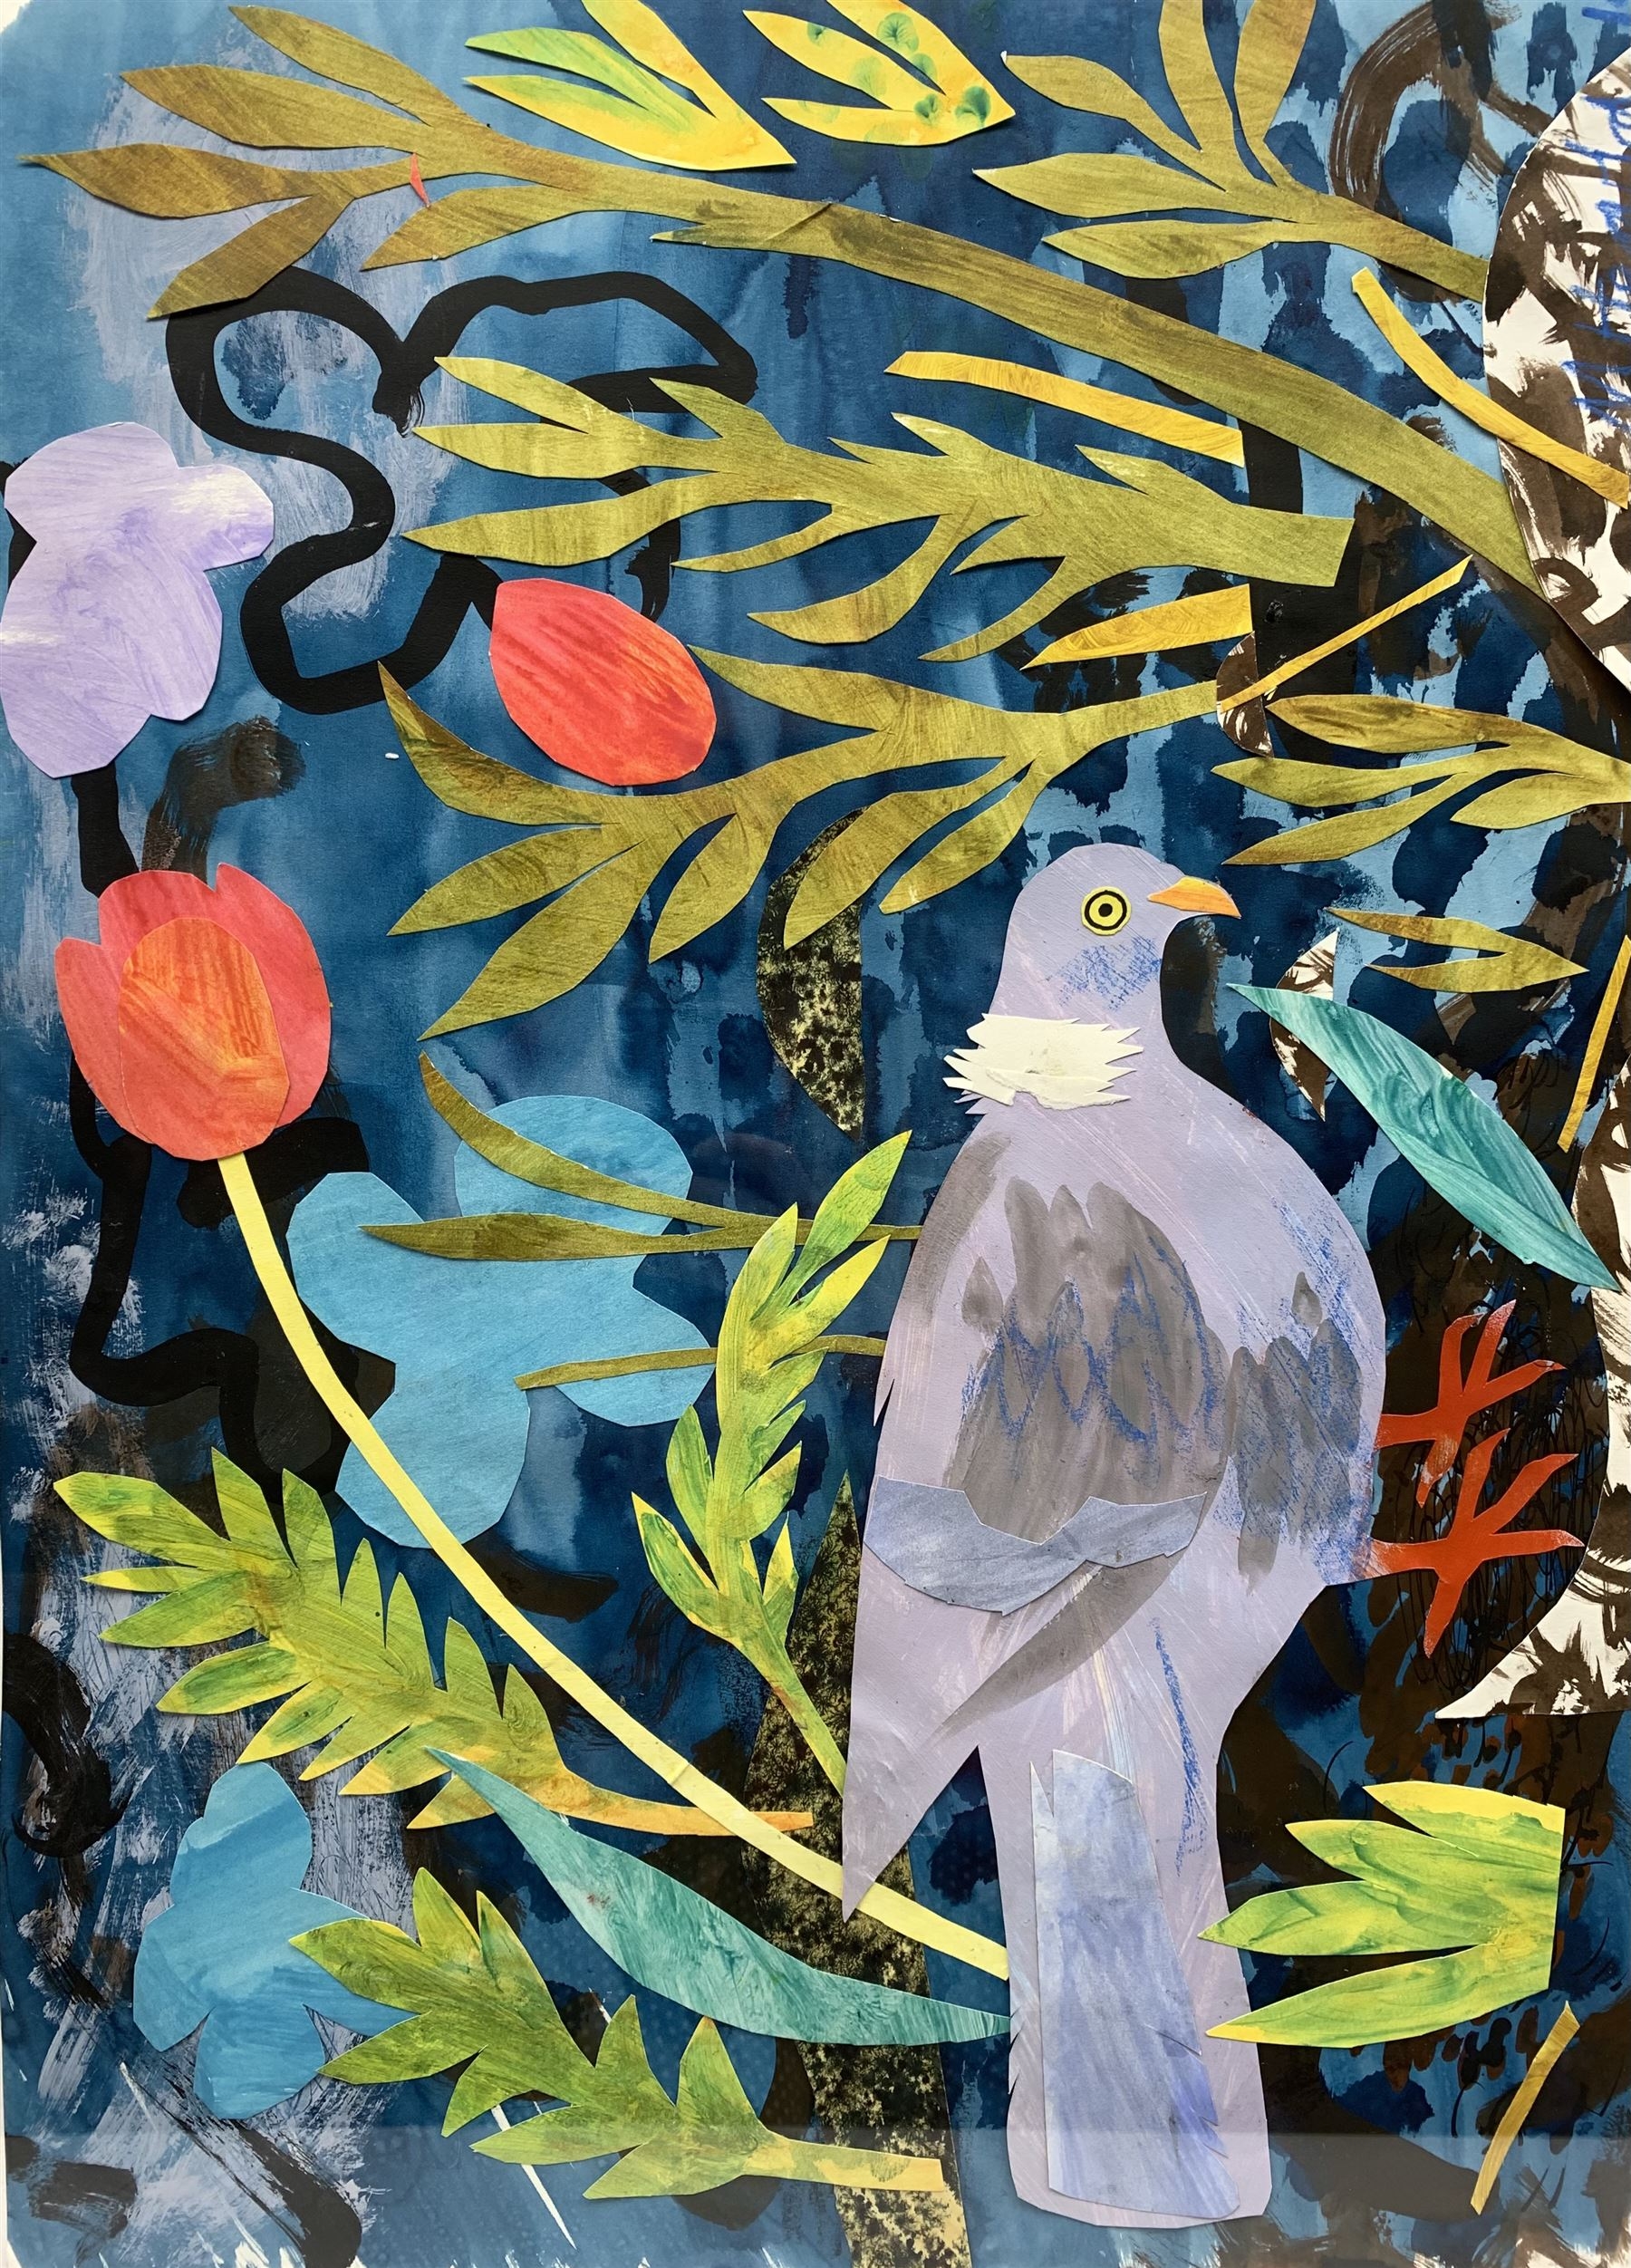 Artwork by Mark Hearld, Pigeon, Made of mixed media collage on paper